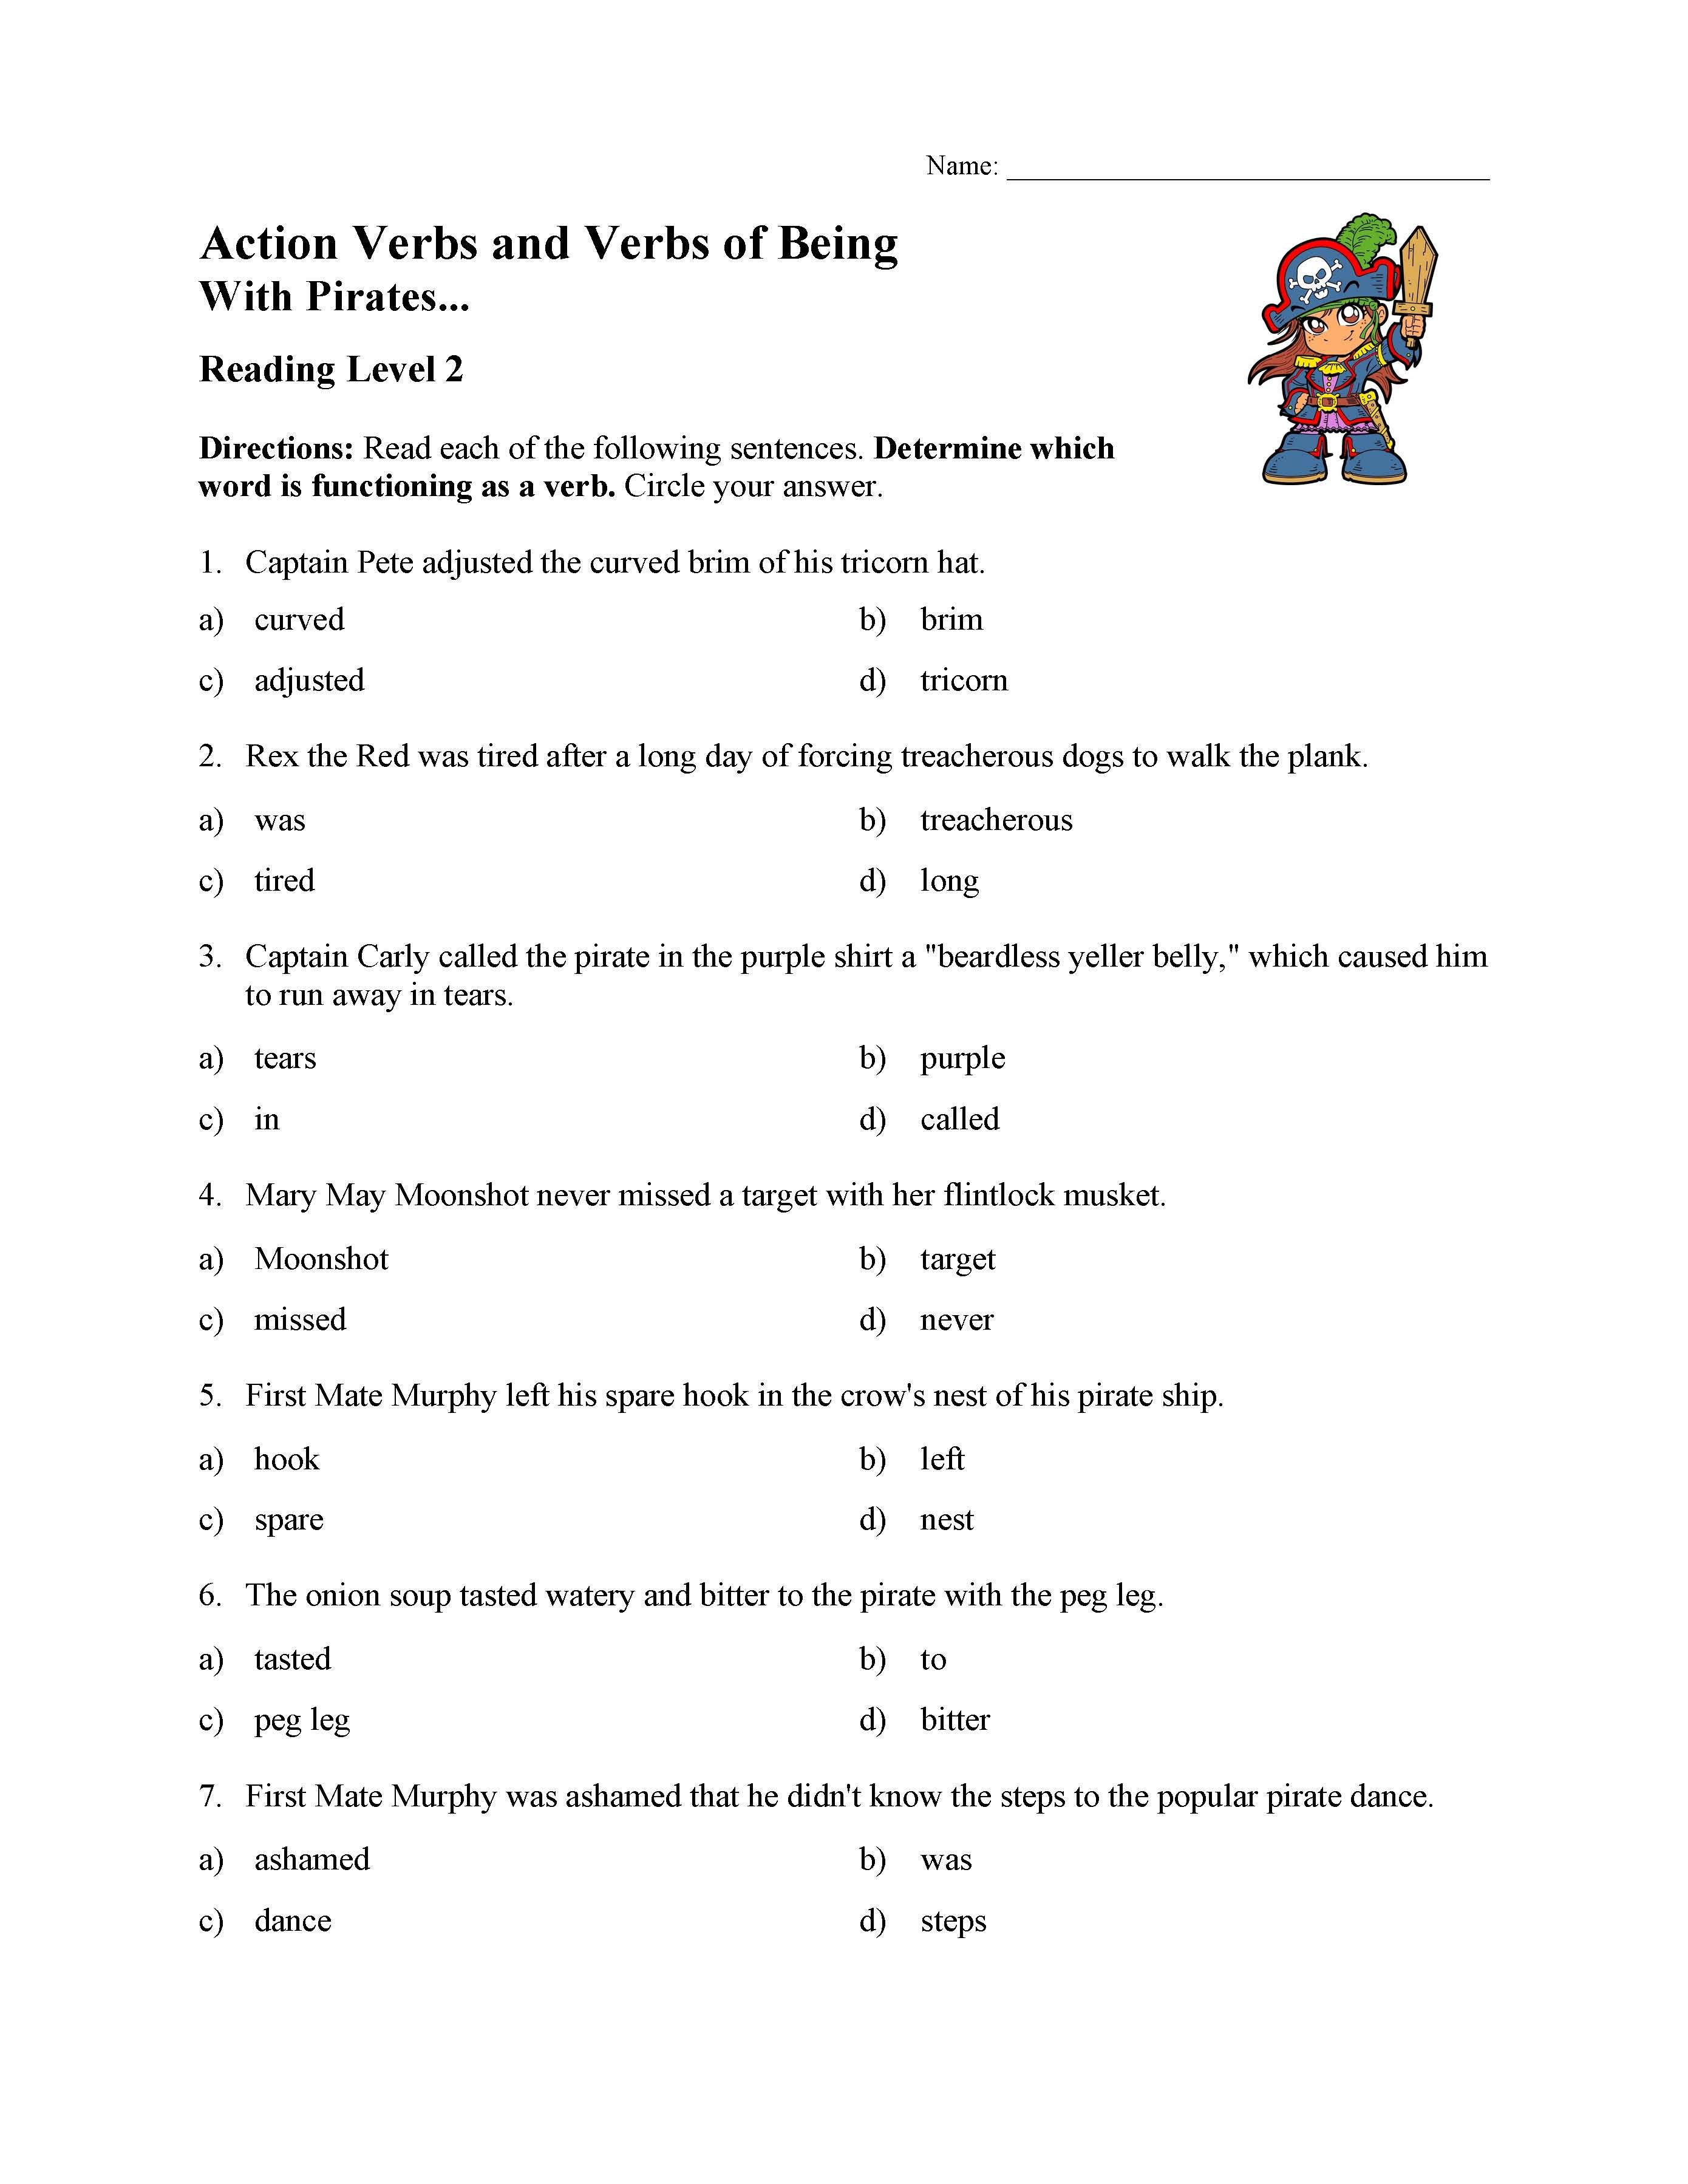 This is a preview image of the Action Verbs and Verbs of Being Test 1 | Reading Level 2.